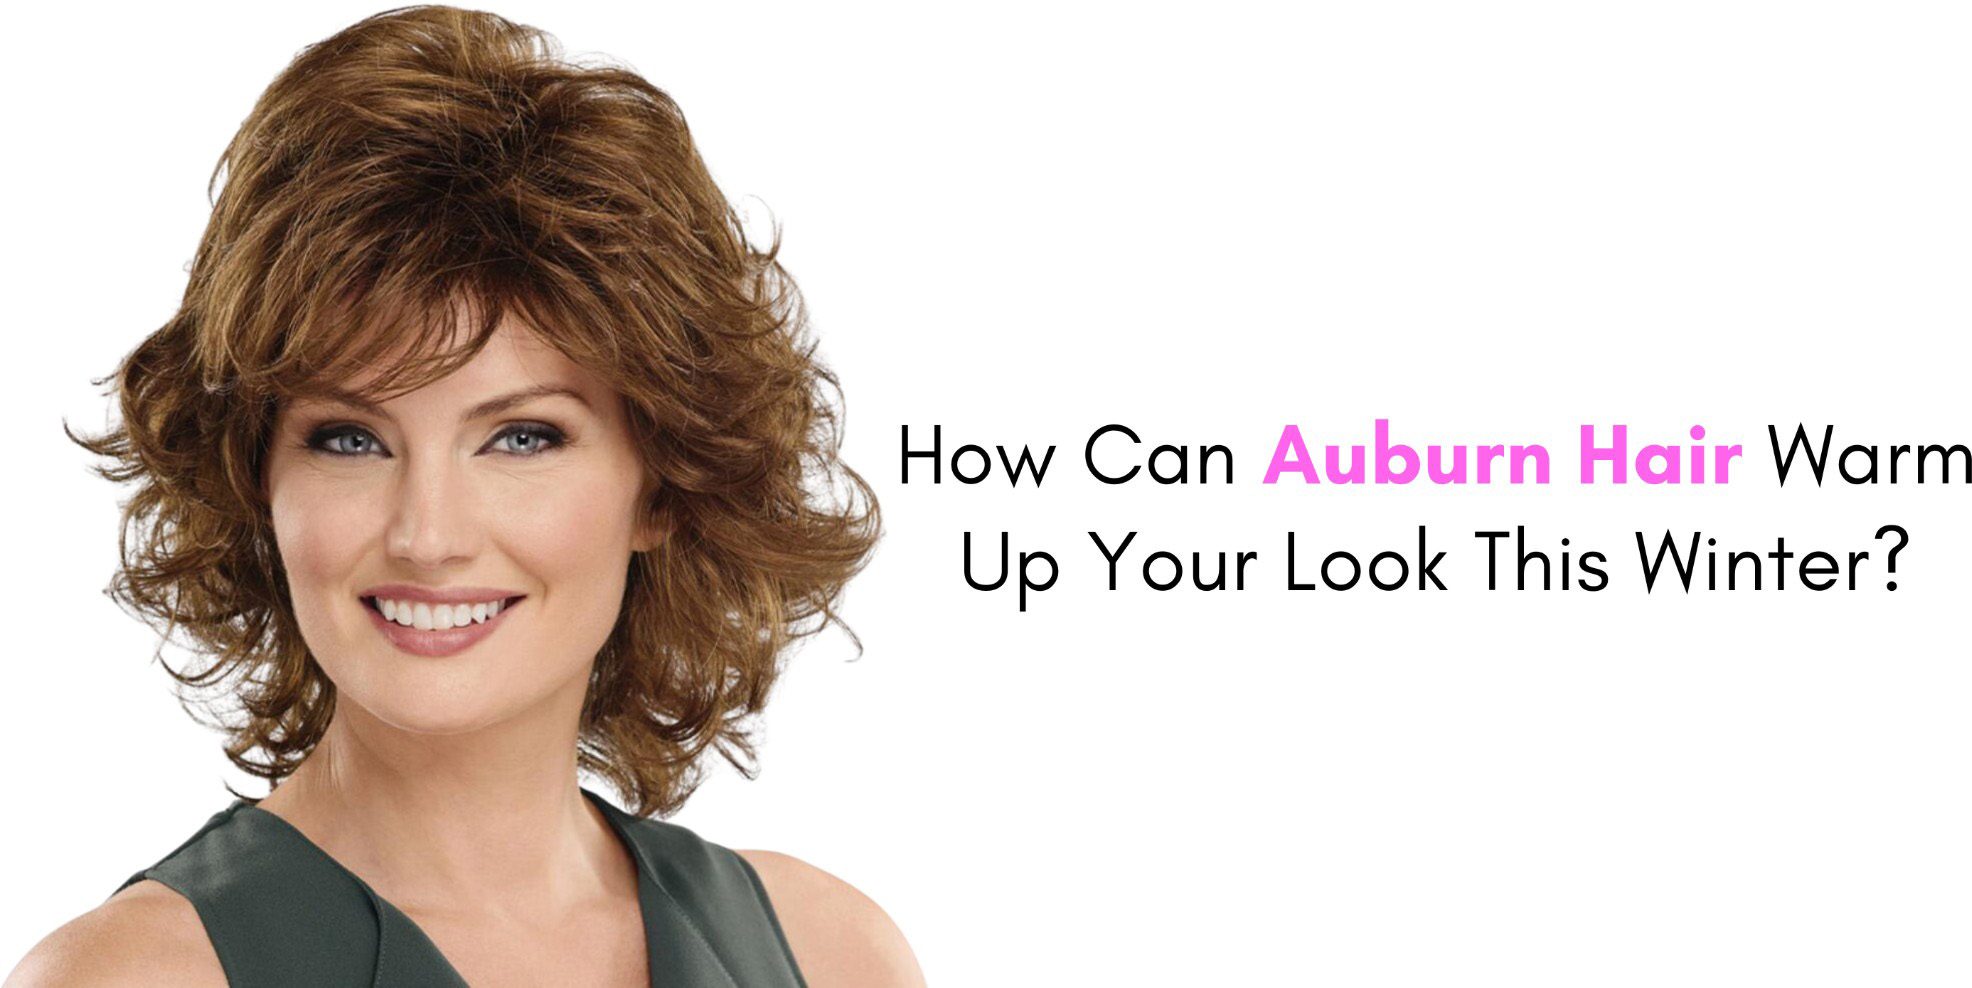 How Can Auburn Hair Warm Up Your Look This Winter?